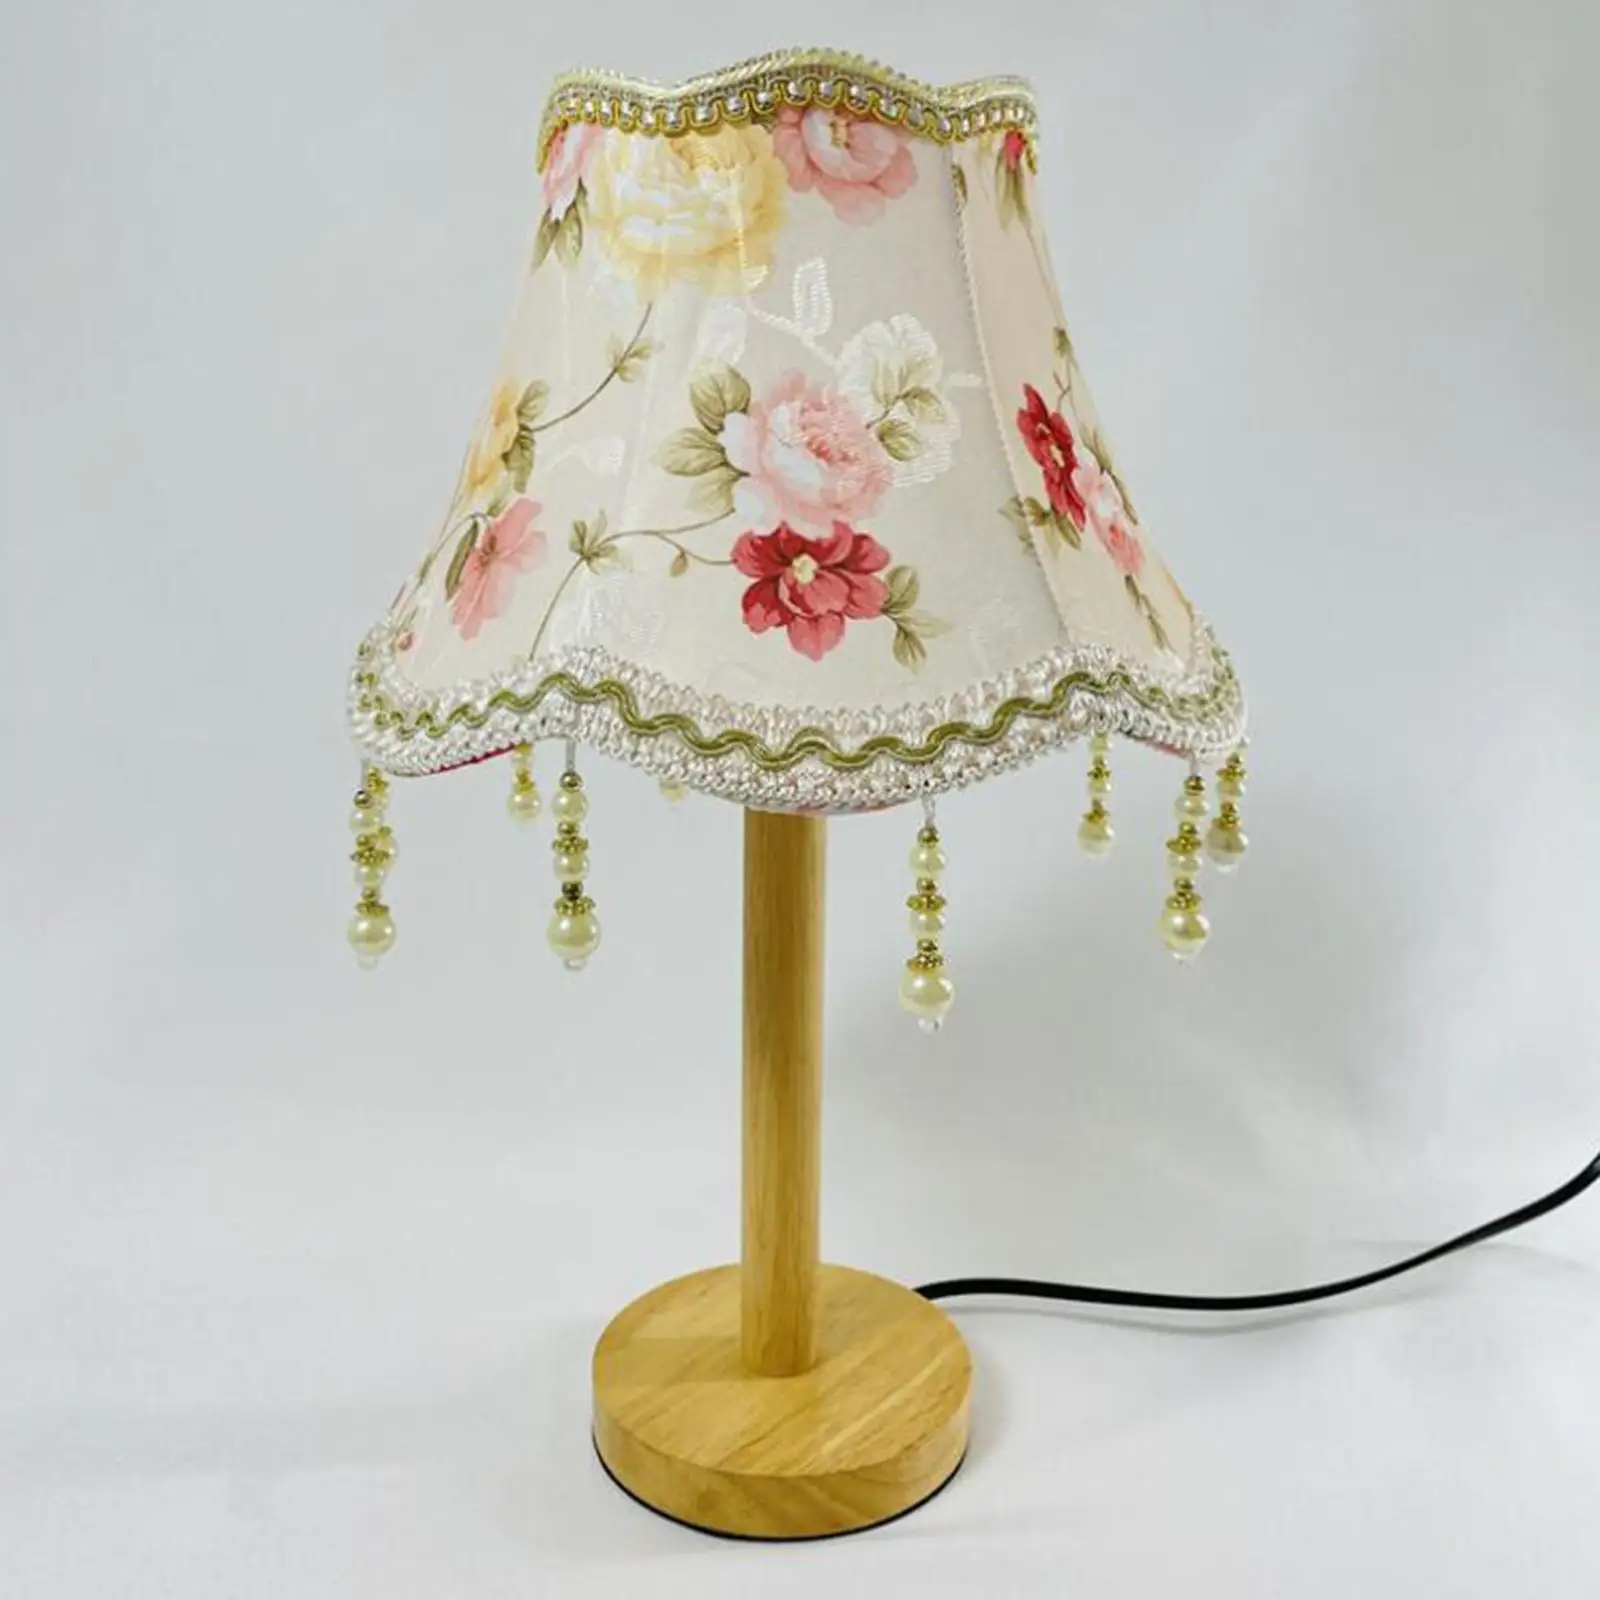 Fabric Lampshade E27 Base Fringe Lamp Shade Replacement Cloth Lampshade with Beads for Home Living Room Restaurant